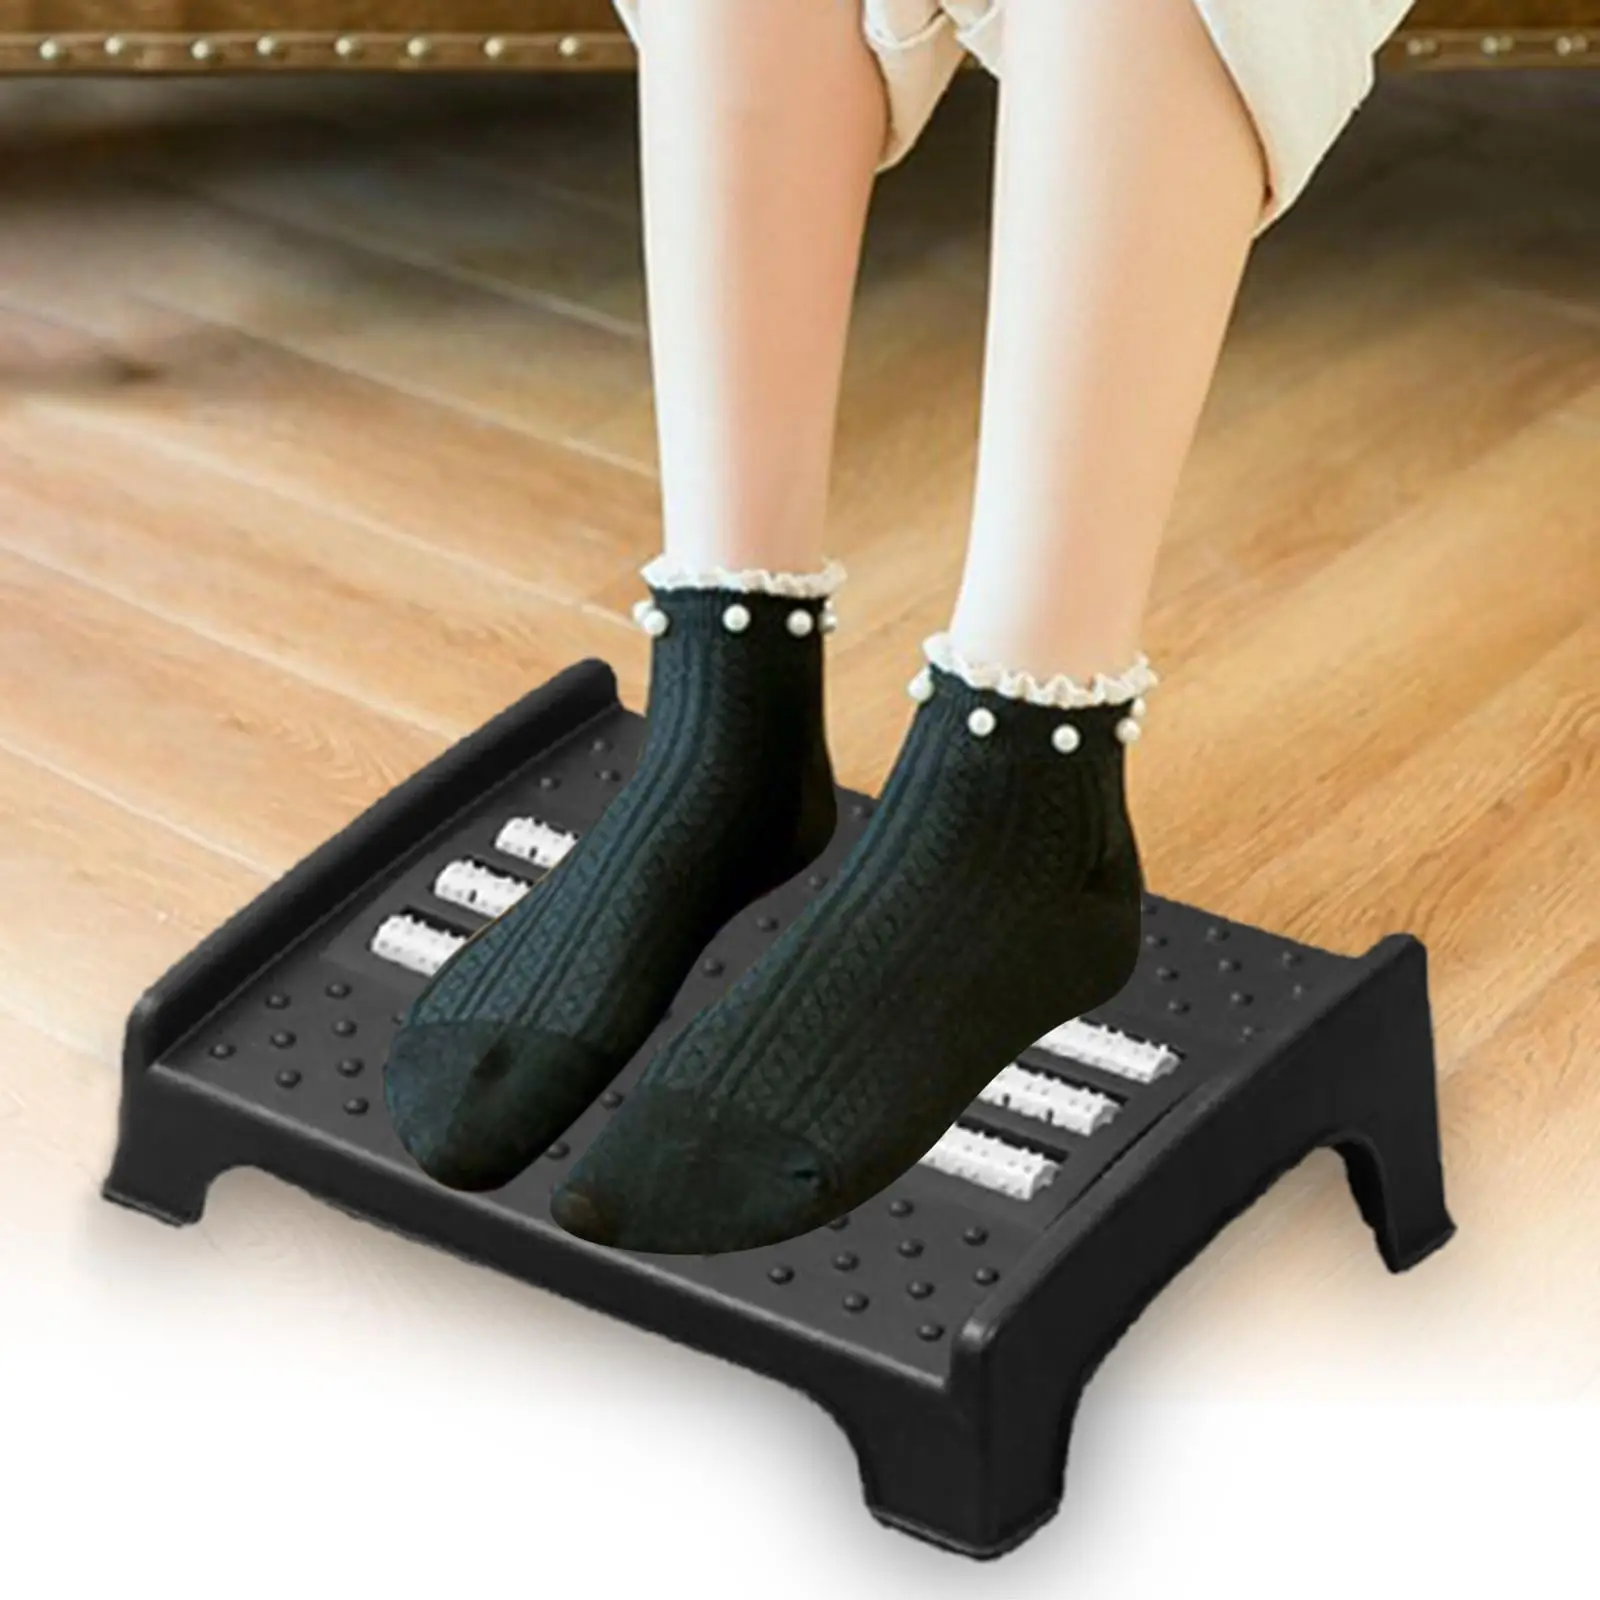 under Desk Foot Rest with Massage Surface Portable Anti Slip Feet and Leg Rest Pillow for Study Living Room Home Bathroom Office